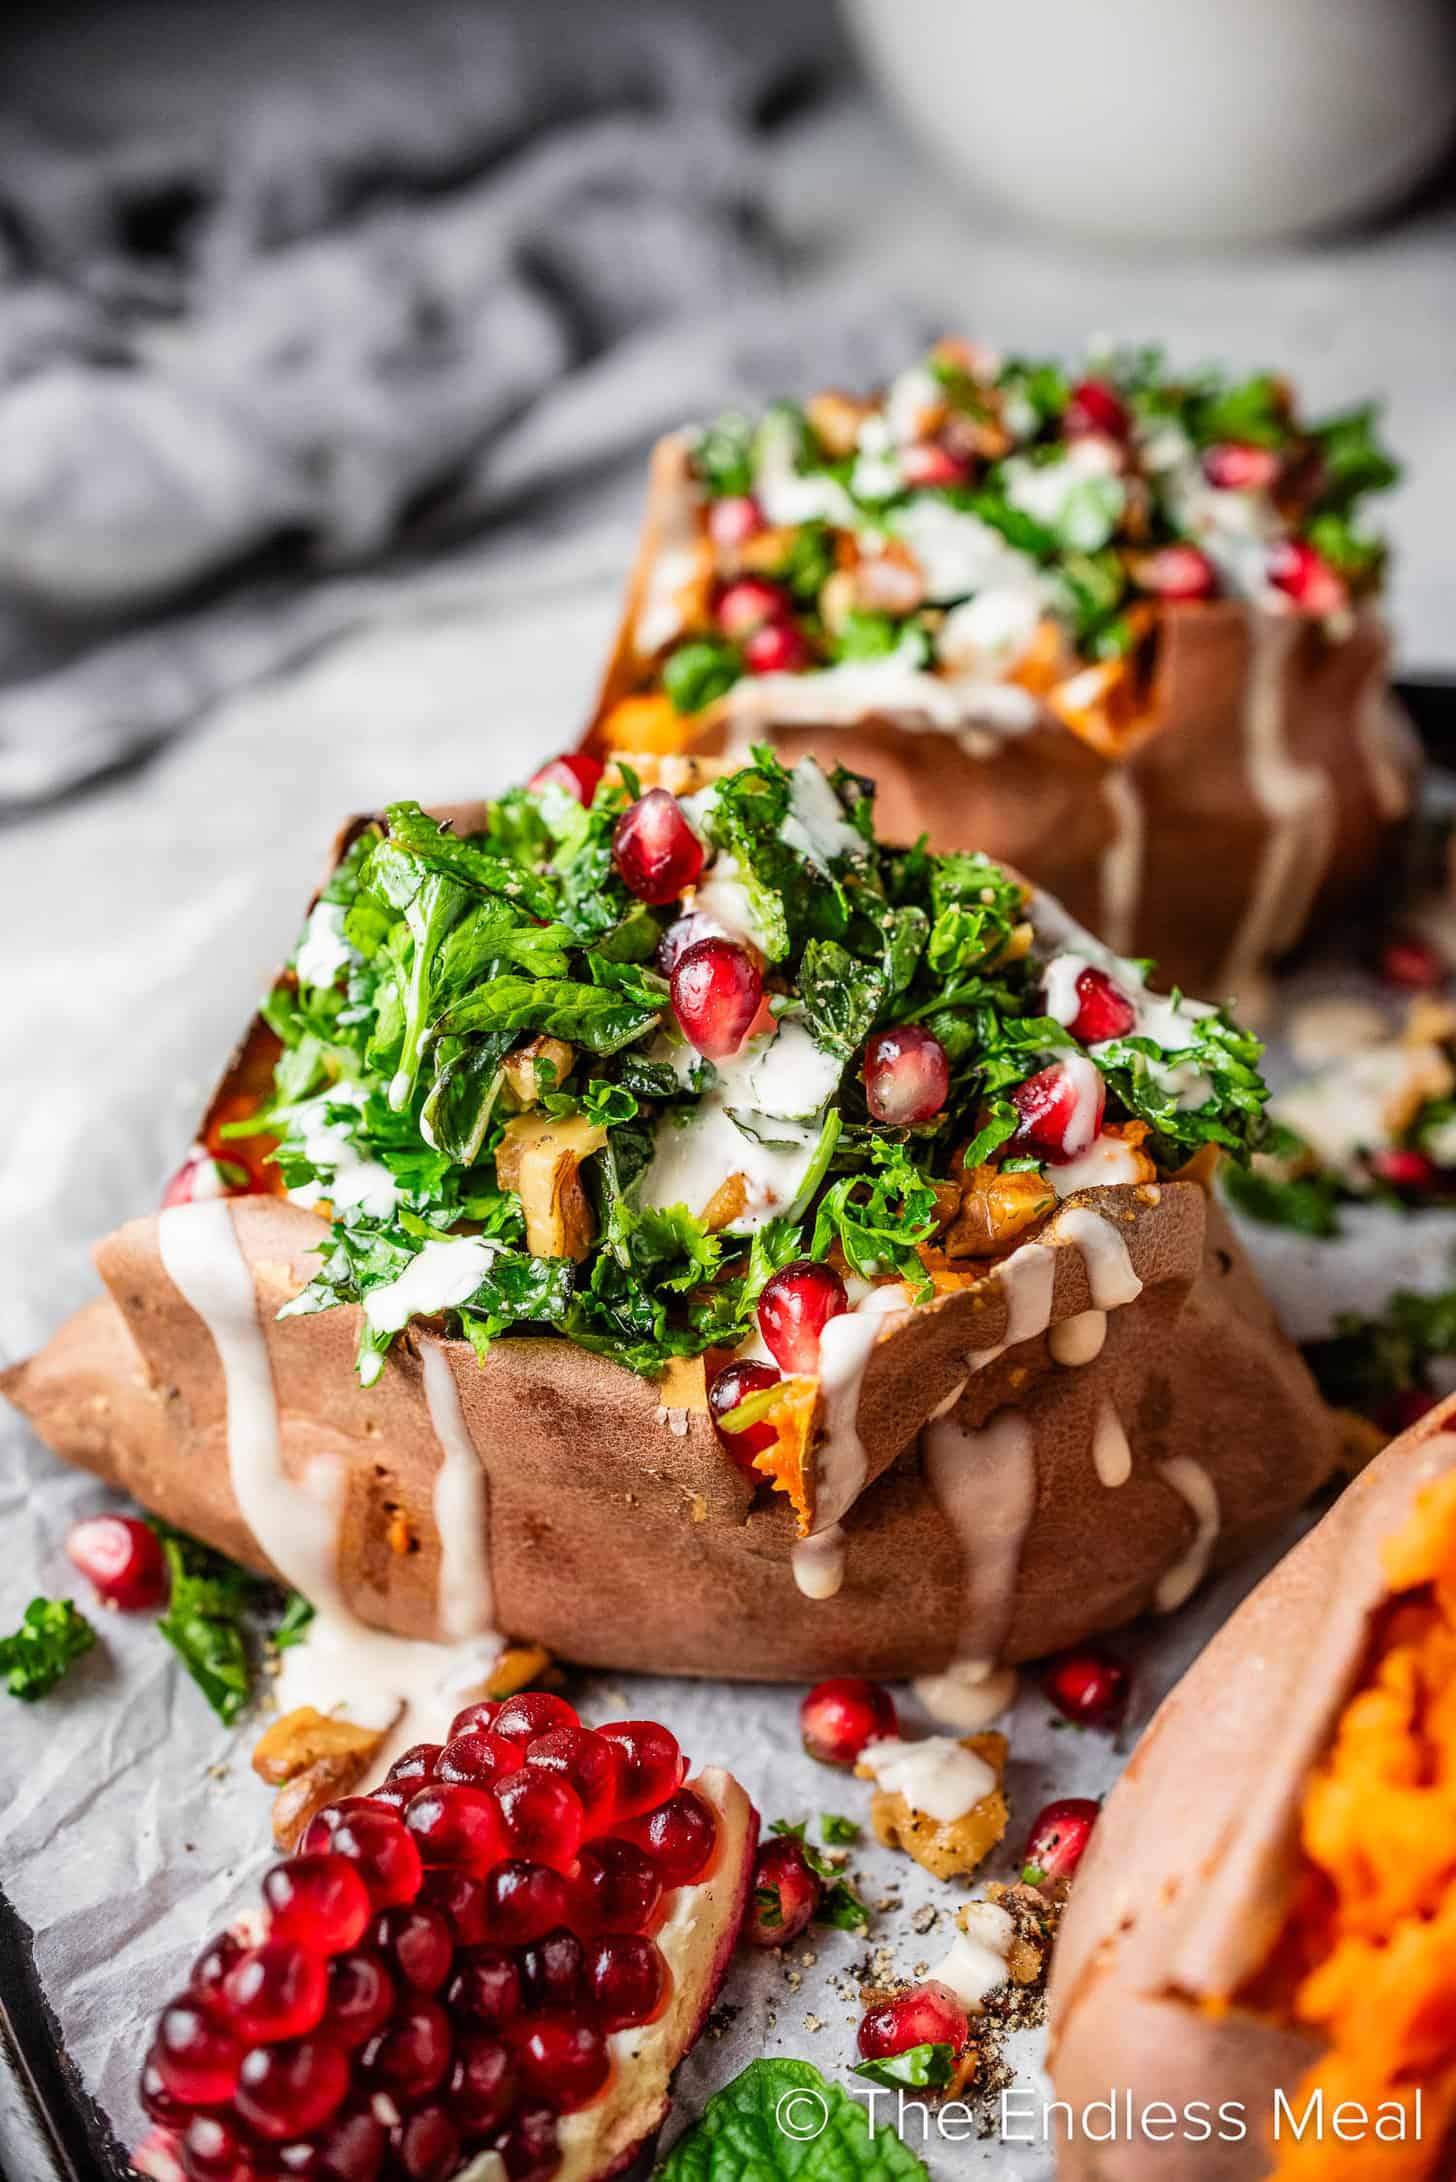 A baked Sweet Potato with Pomegranate and mint